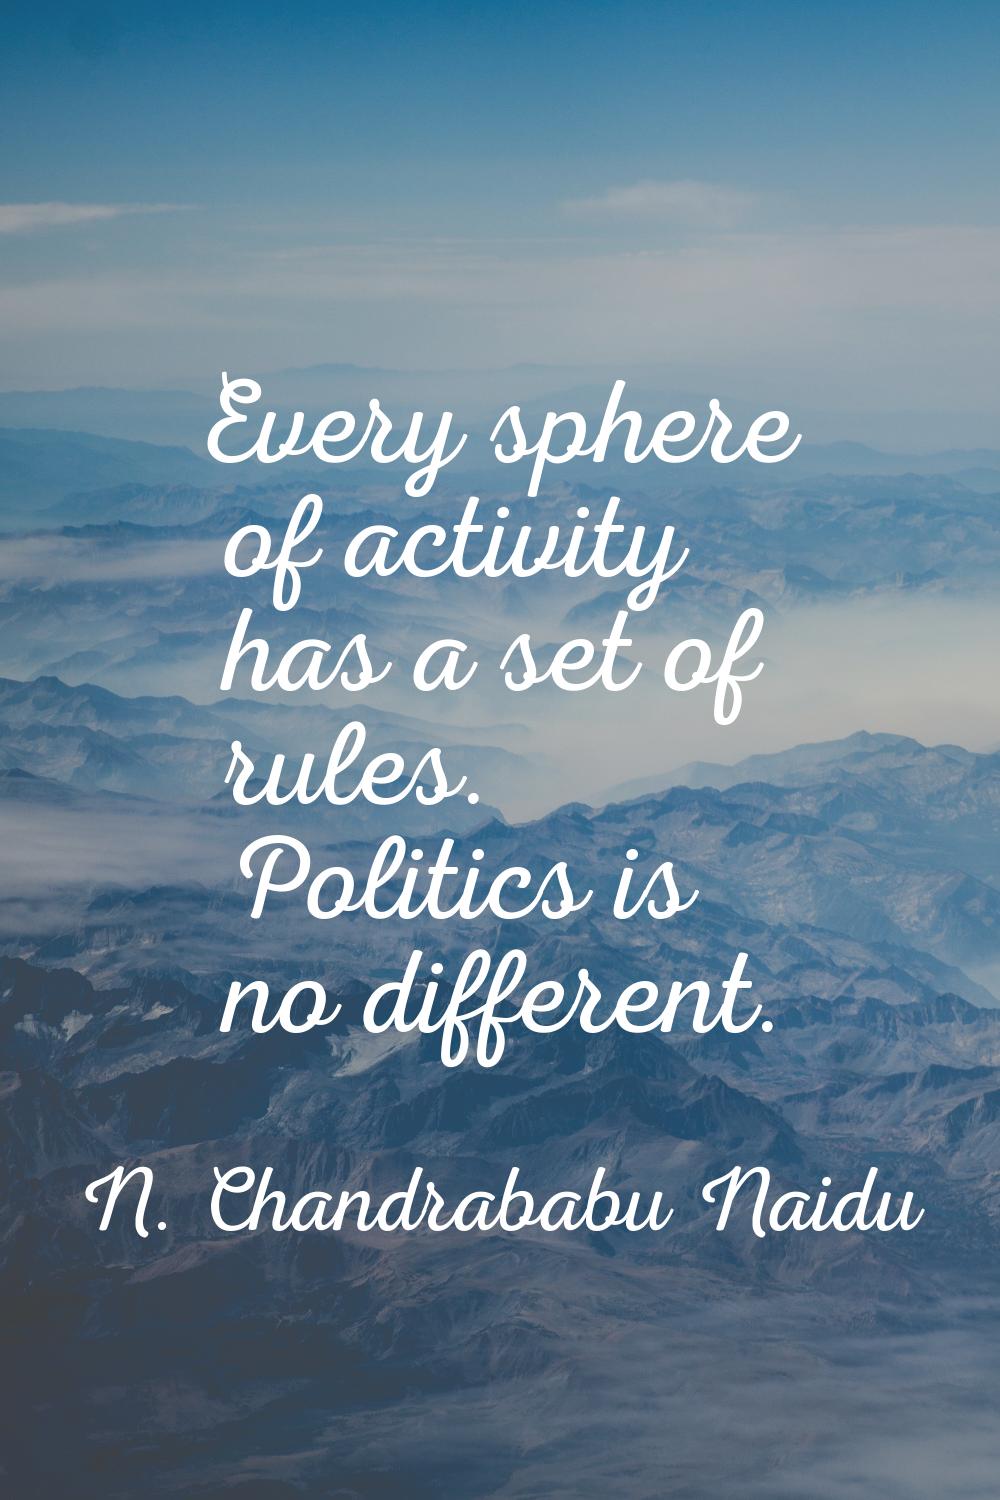 Every sphere of activity has a set of rules. Politics is no different.